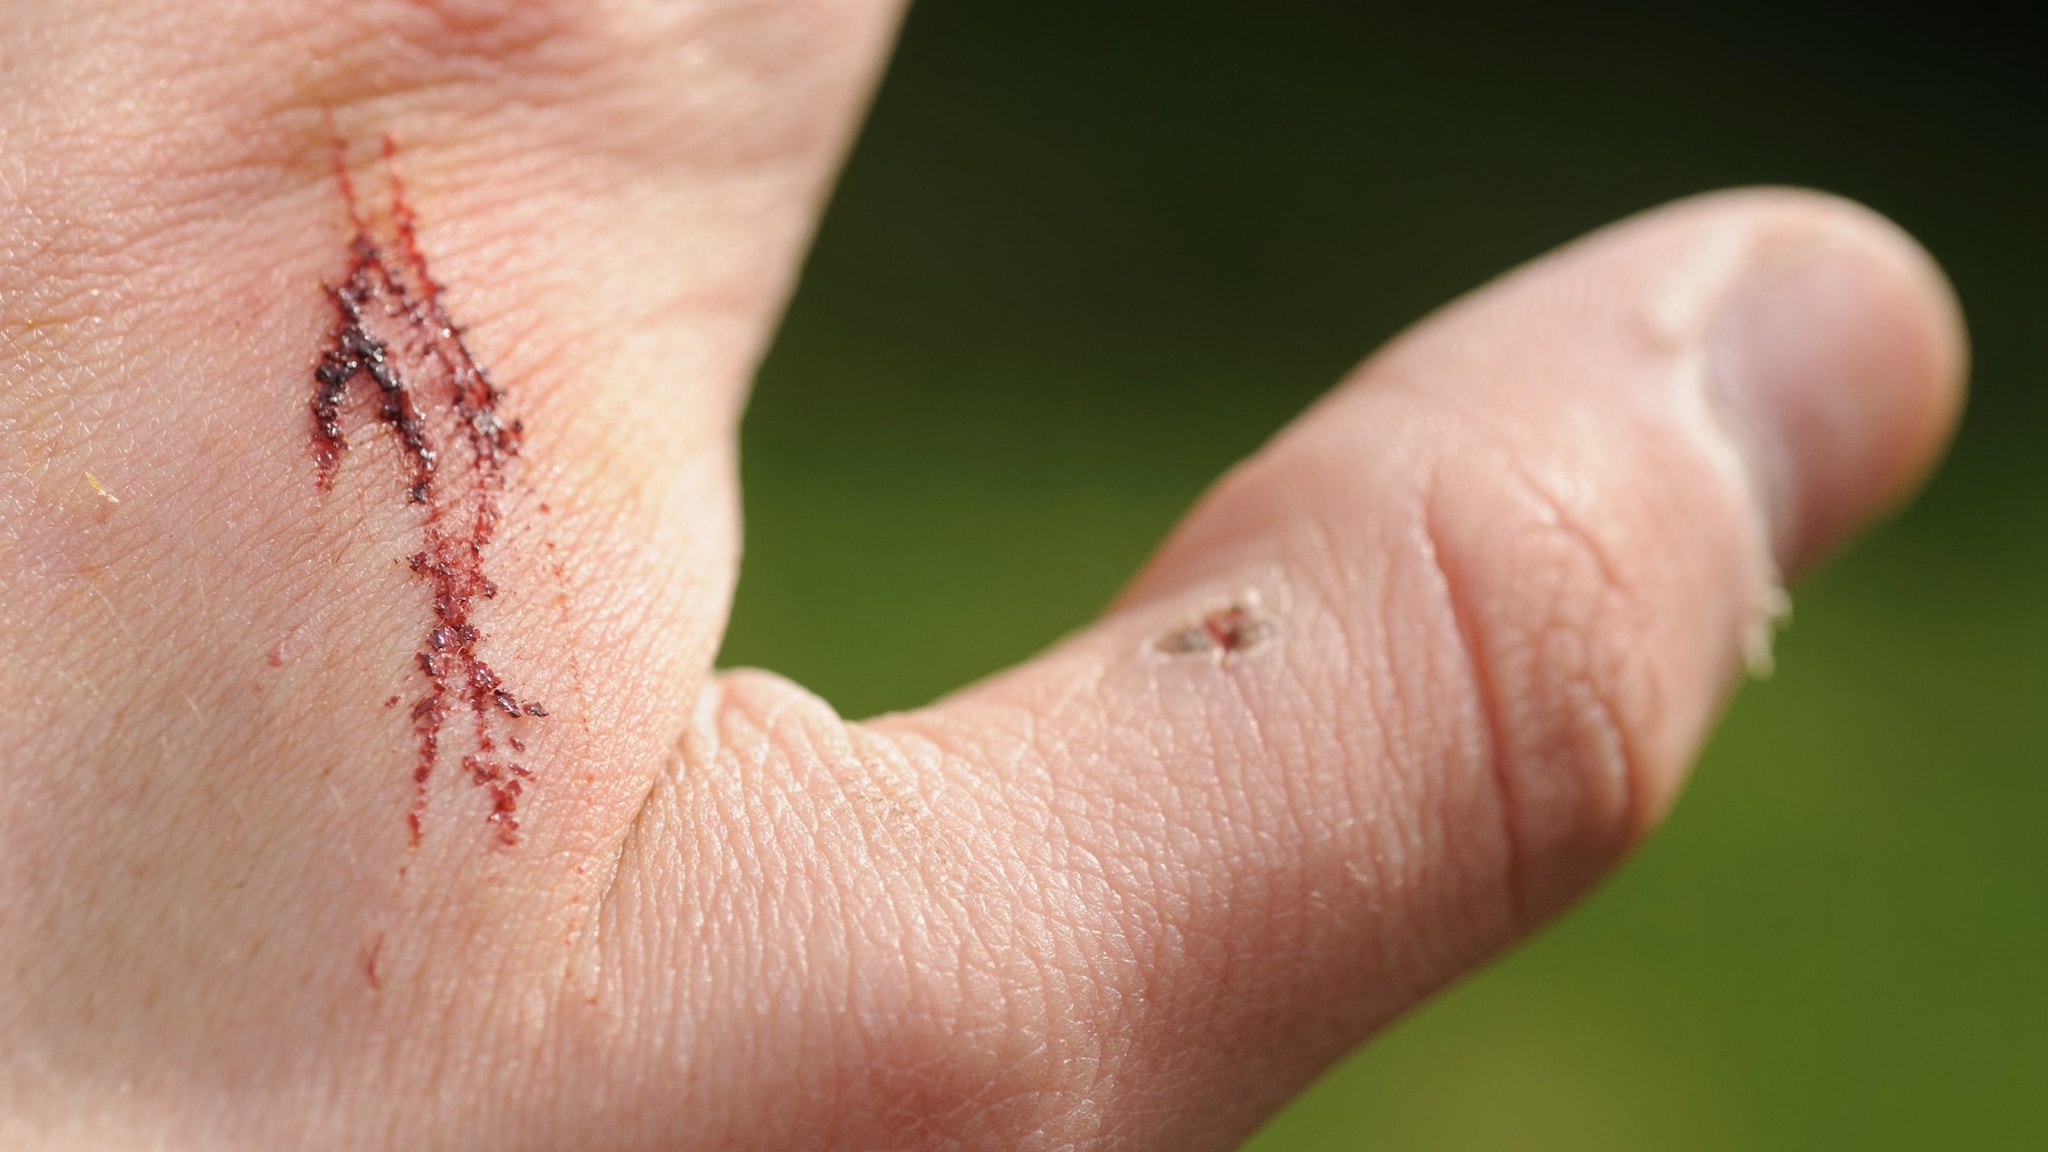 Closeup of a bloody wound on a person's hand.